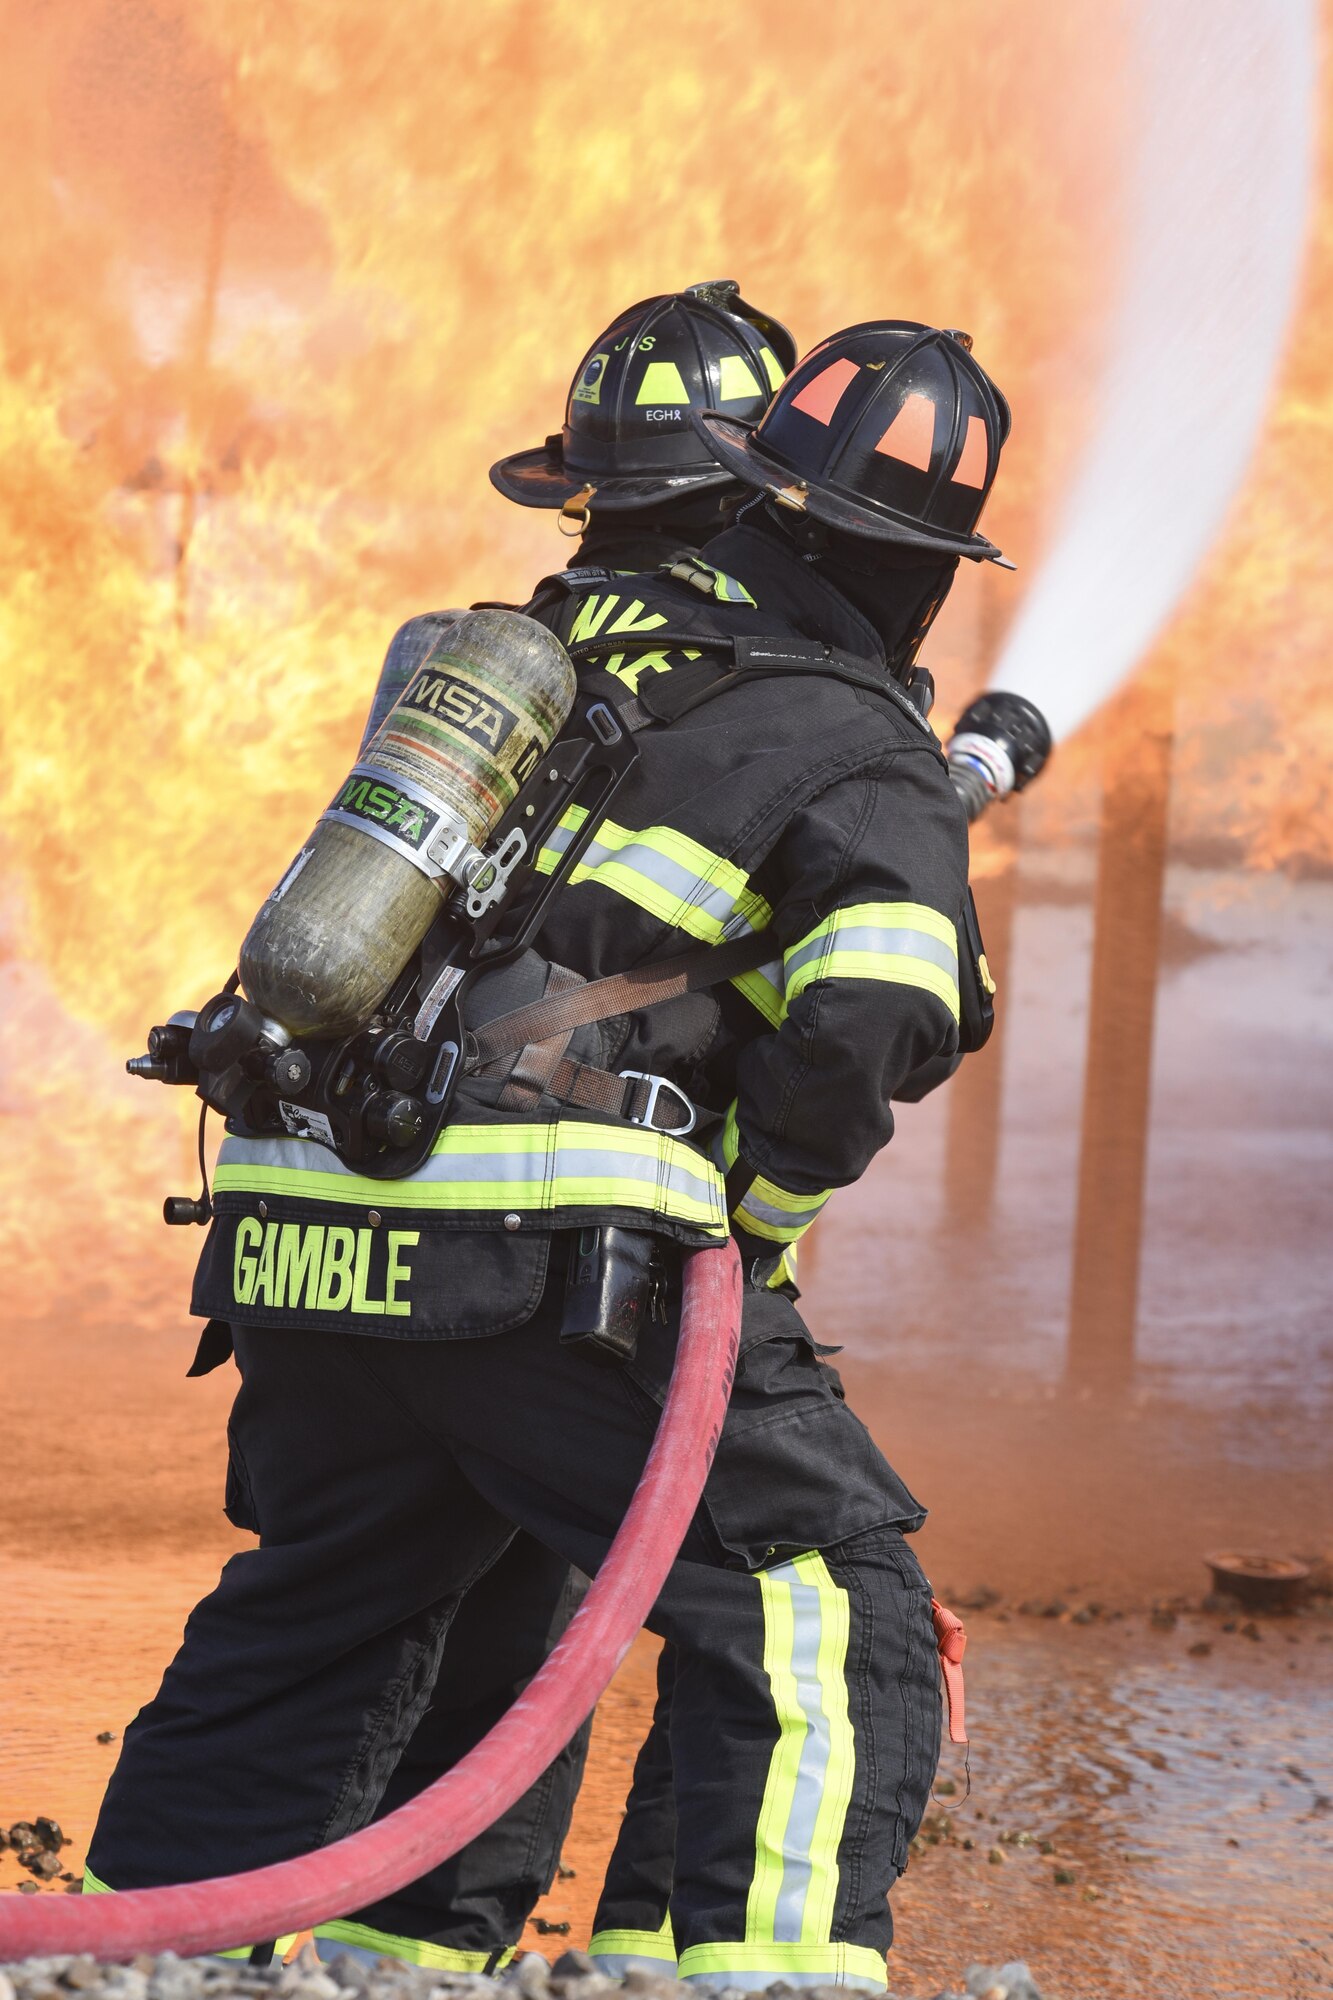 Two member teams from the 72nd Civil Engineer Squadron, fire department, work together as they approach the full-size aircraft fire training device Sept. 13, 2017, Tinker Air Force Base, Oklahoma. The firefighters were conducting annual  recertification training in the realistic environment.